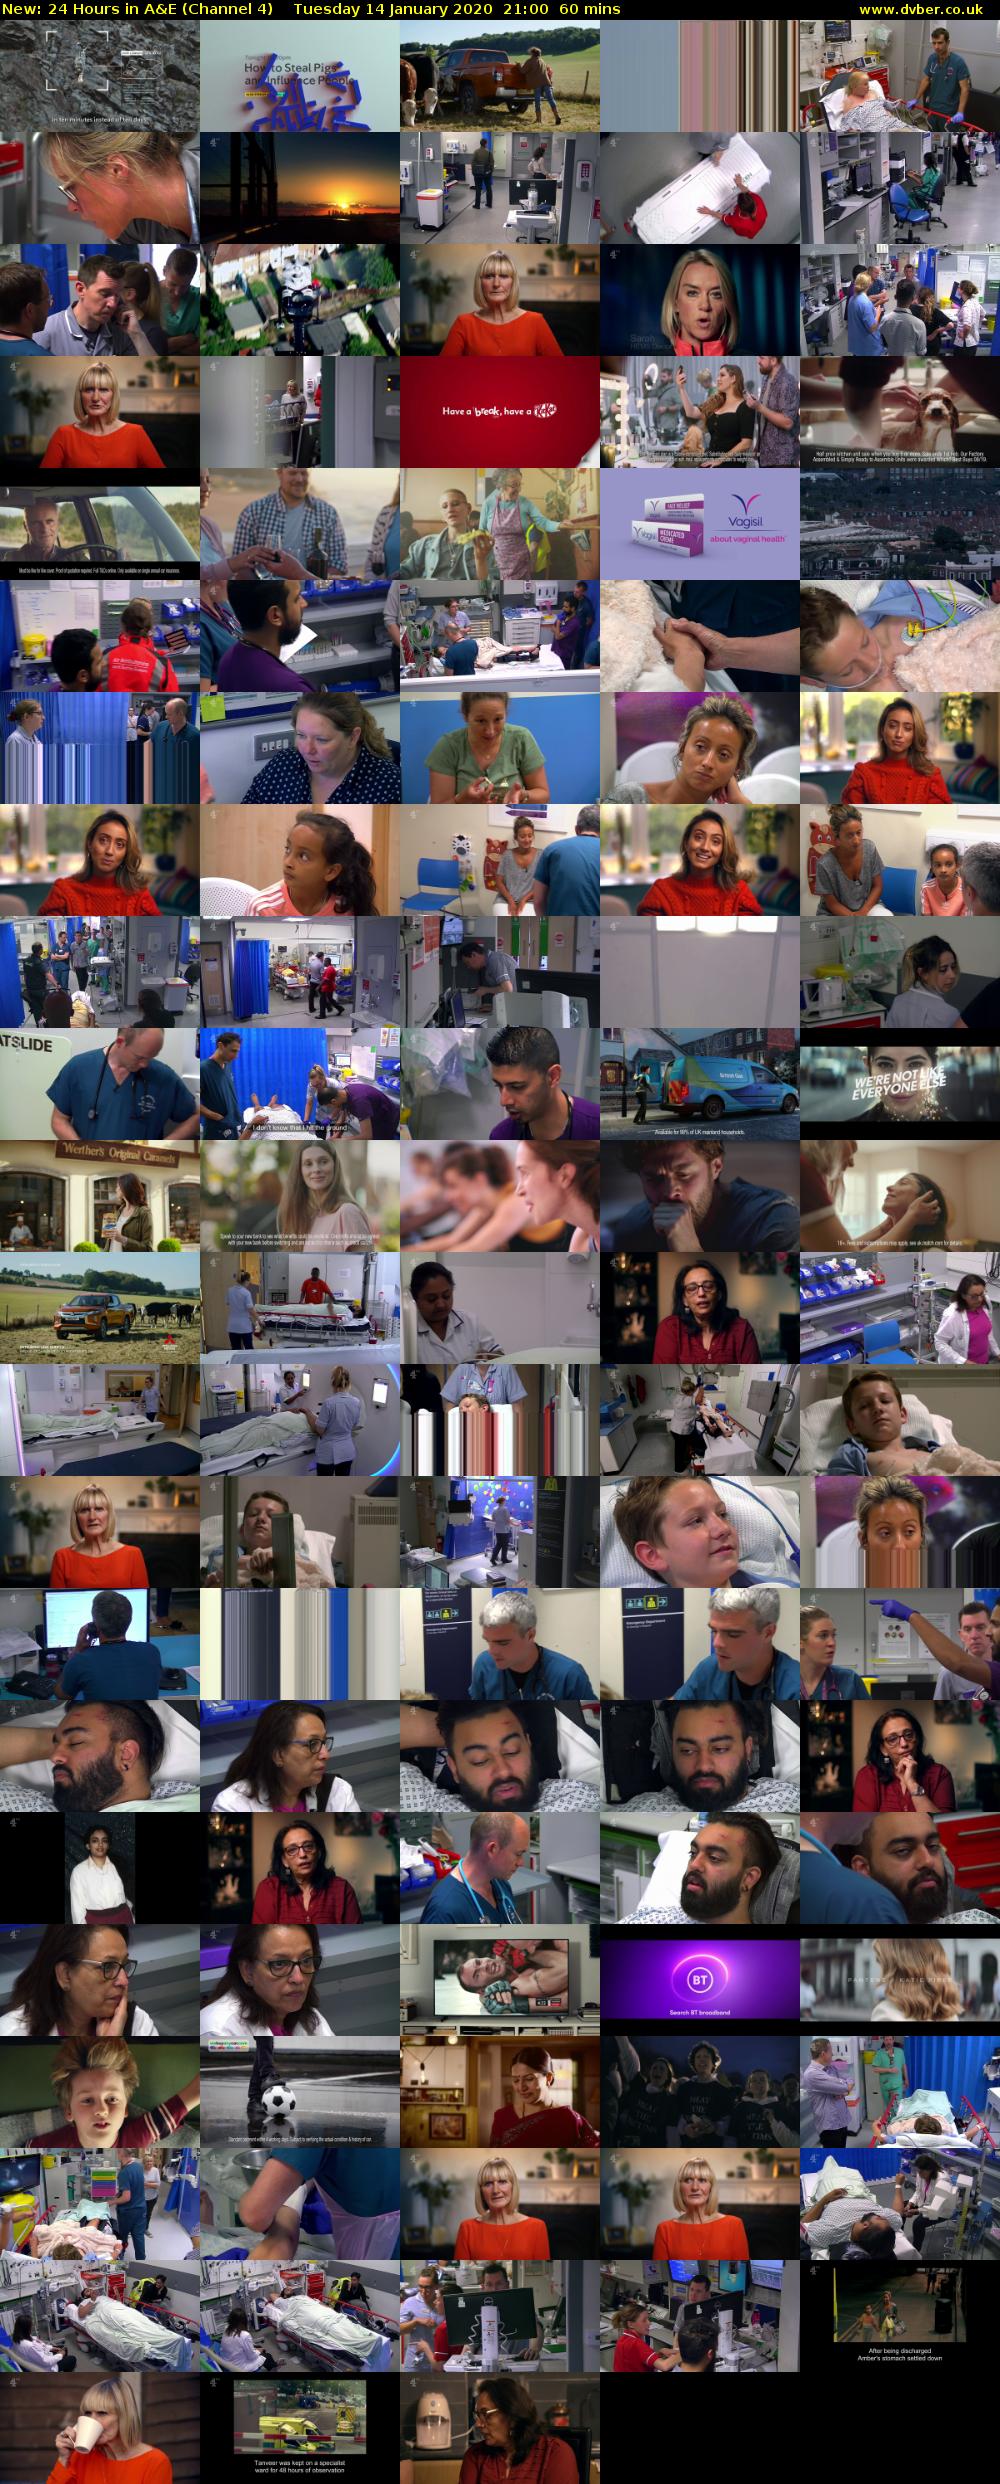 24 Hours in A&E (Channel 4) Tuesday 14 January 2020 21:00 - 22:00